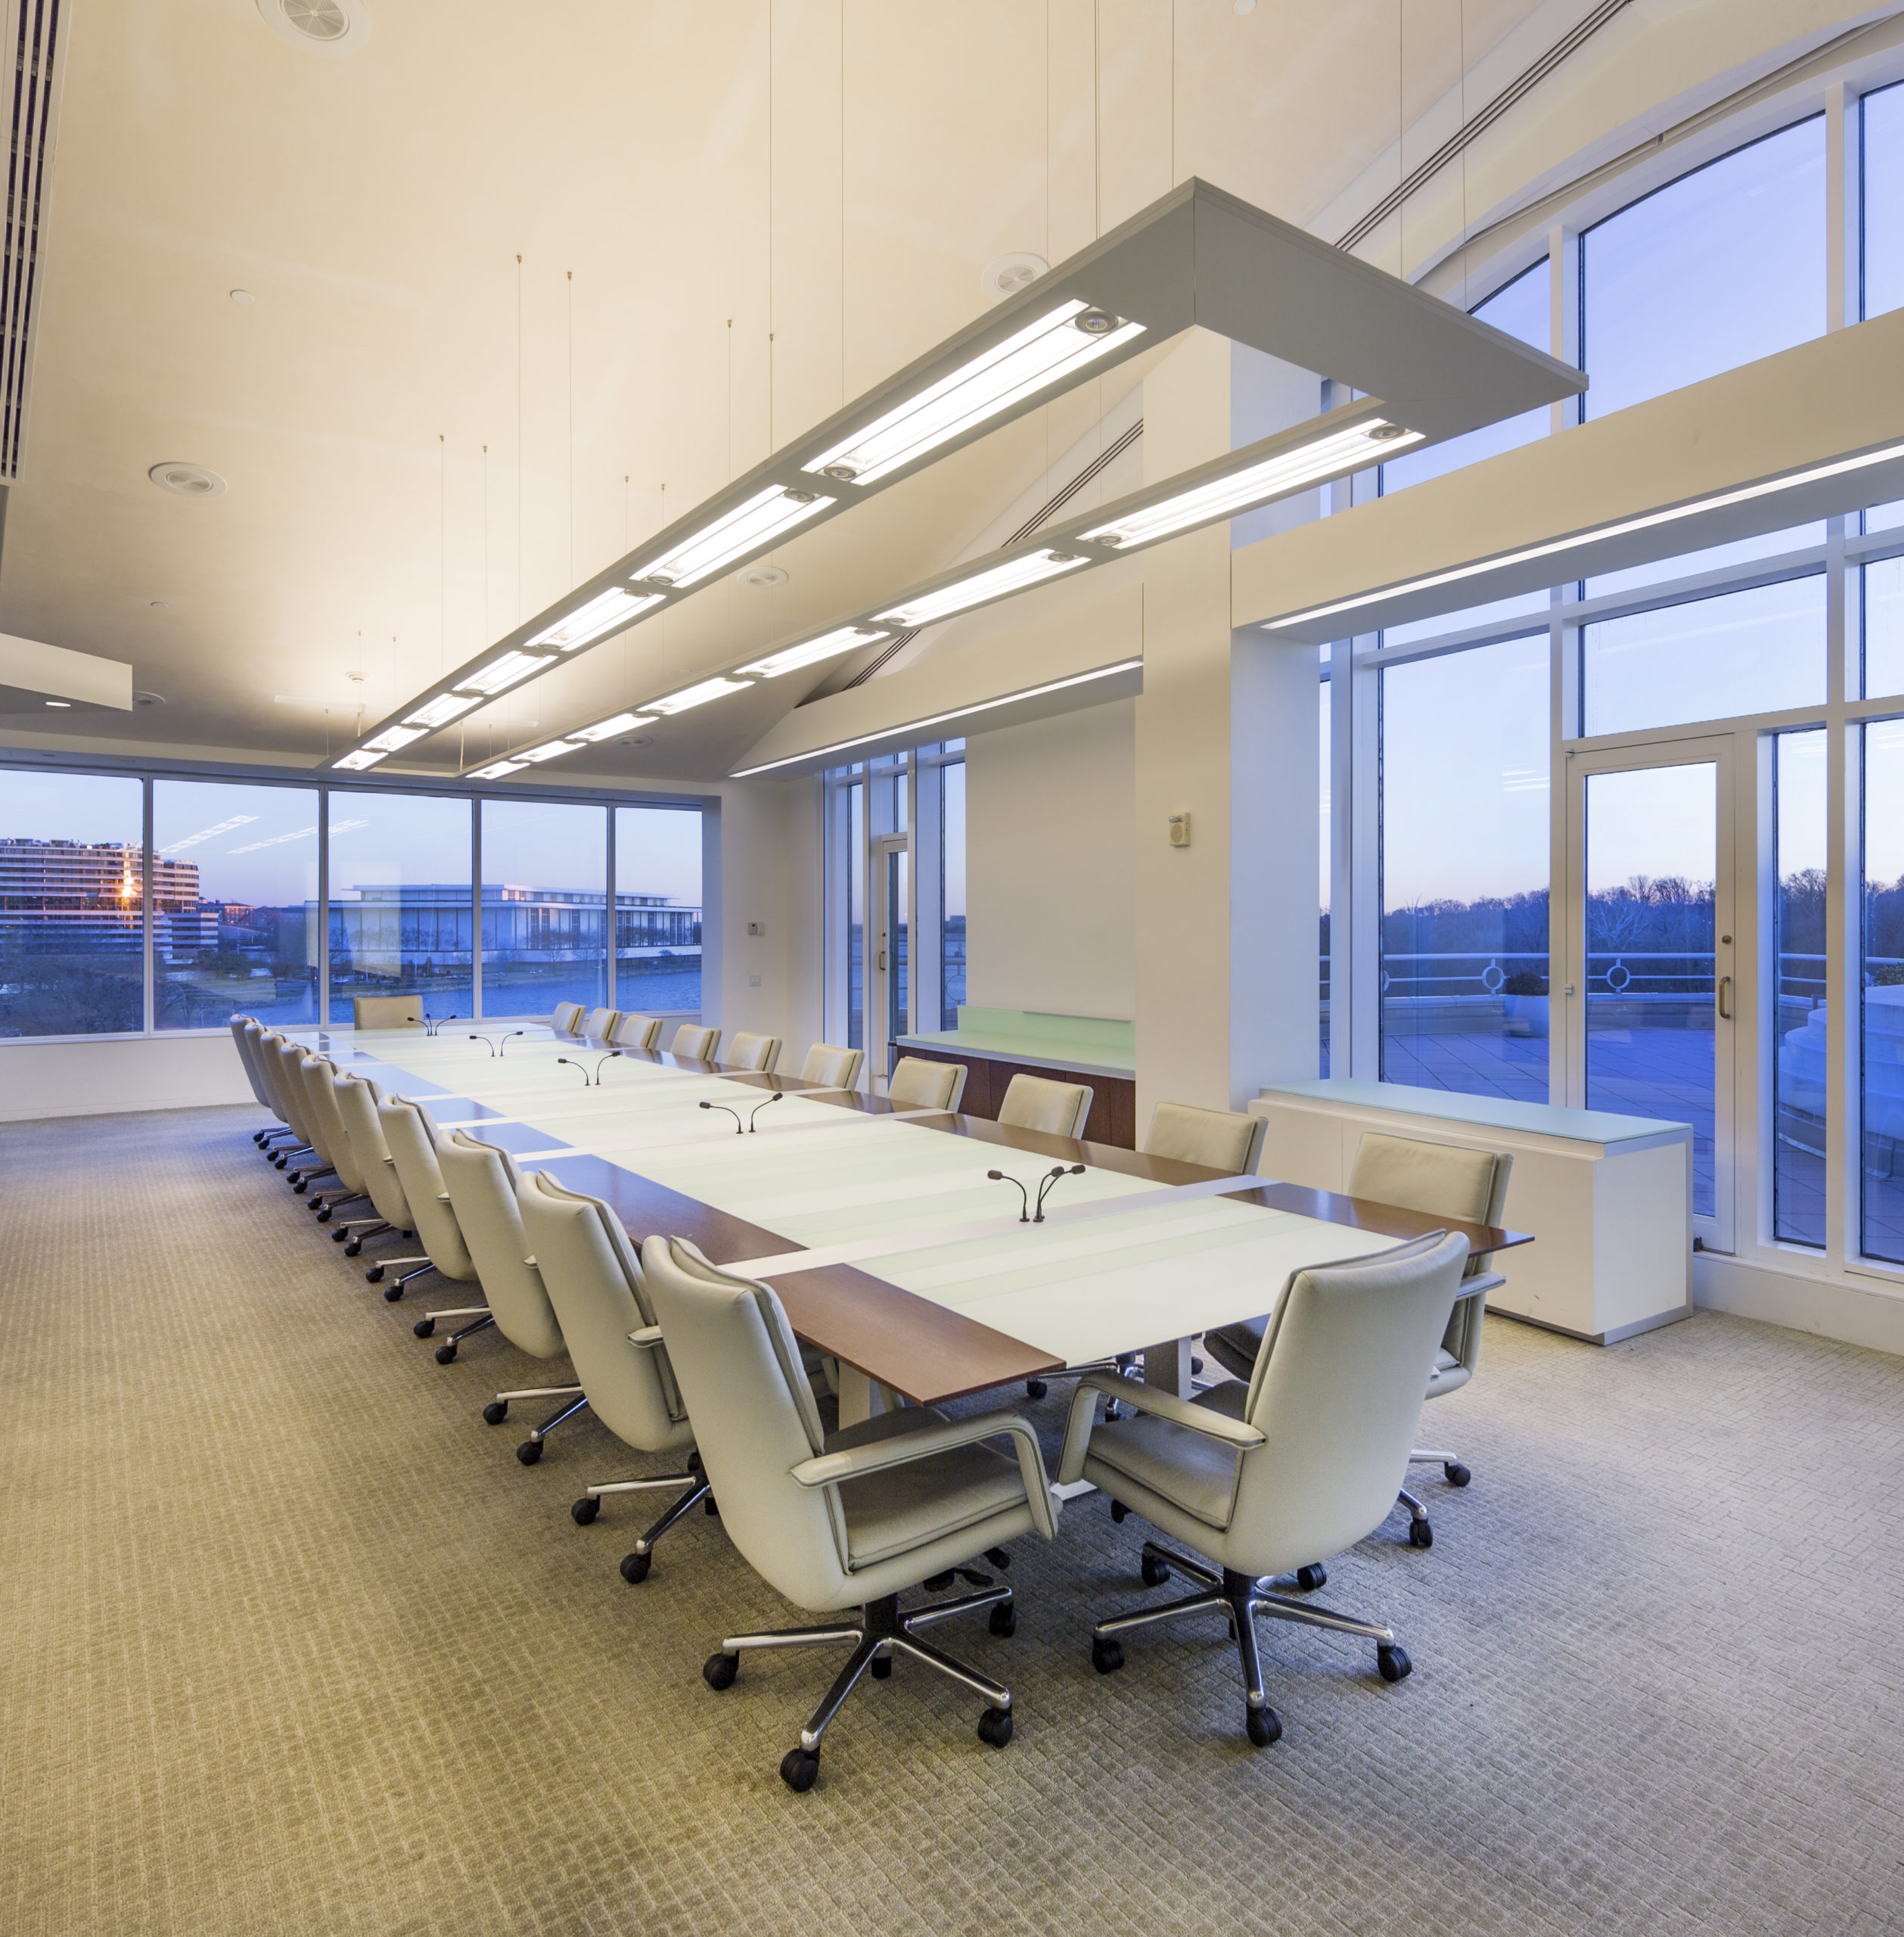 Waterfront Conference Room at the Washington Harbour